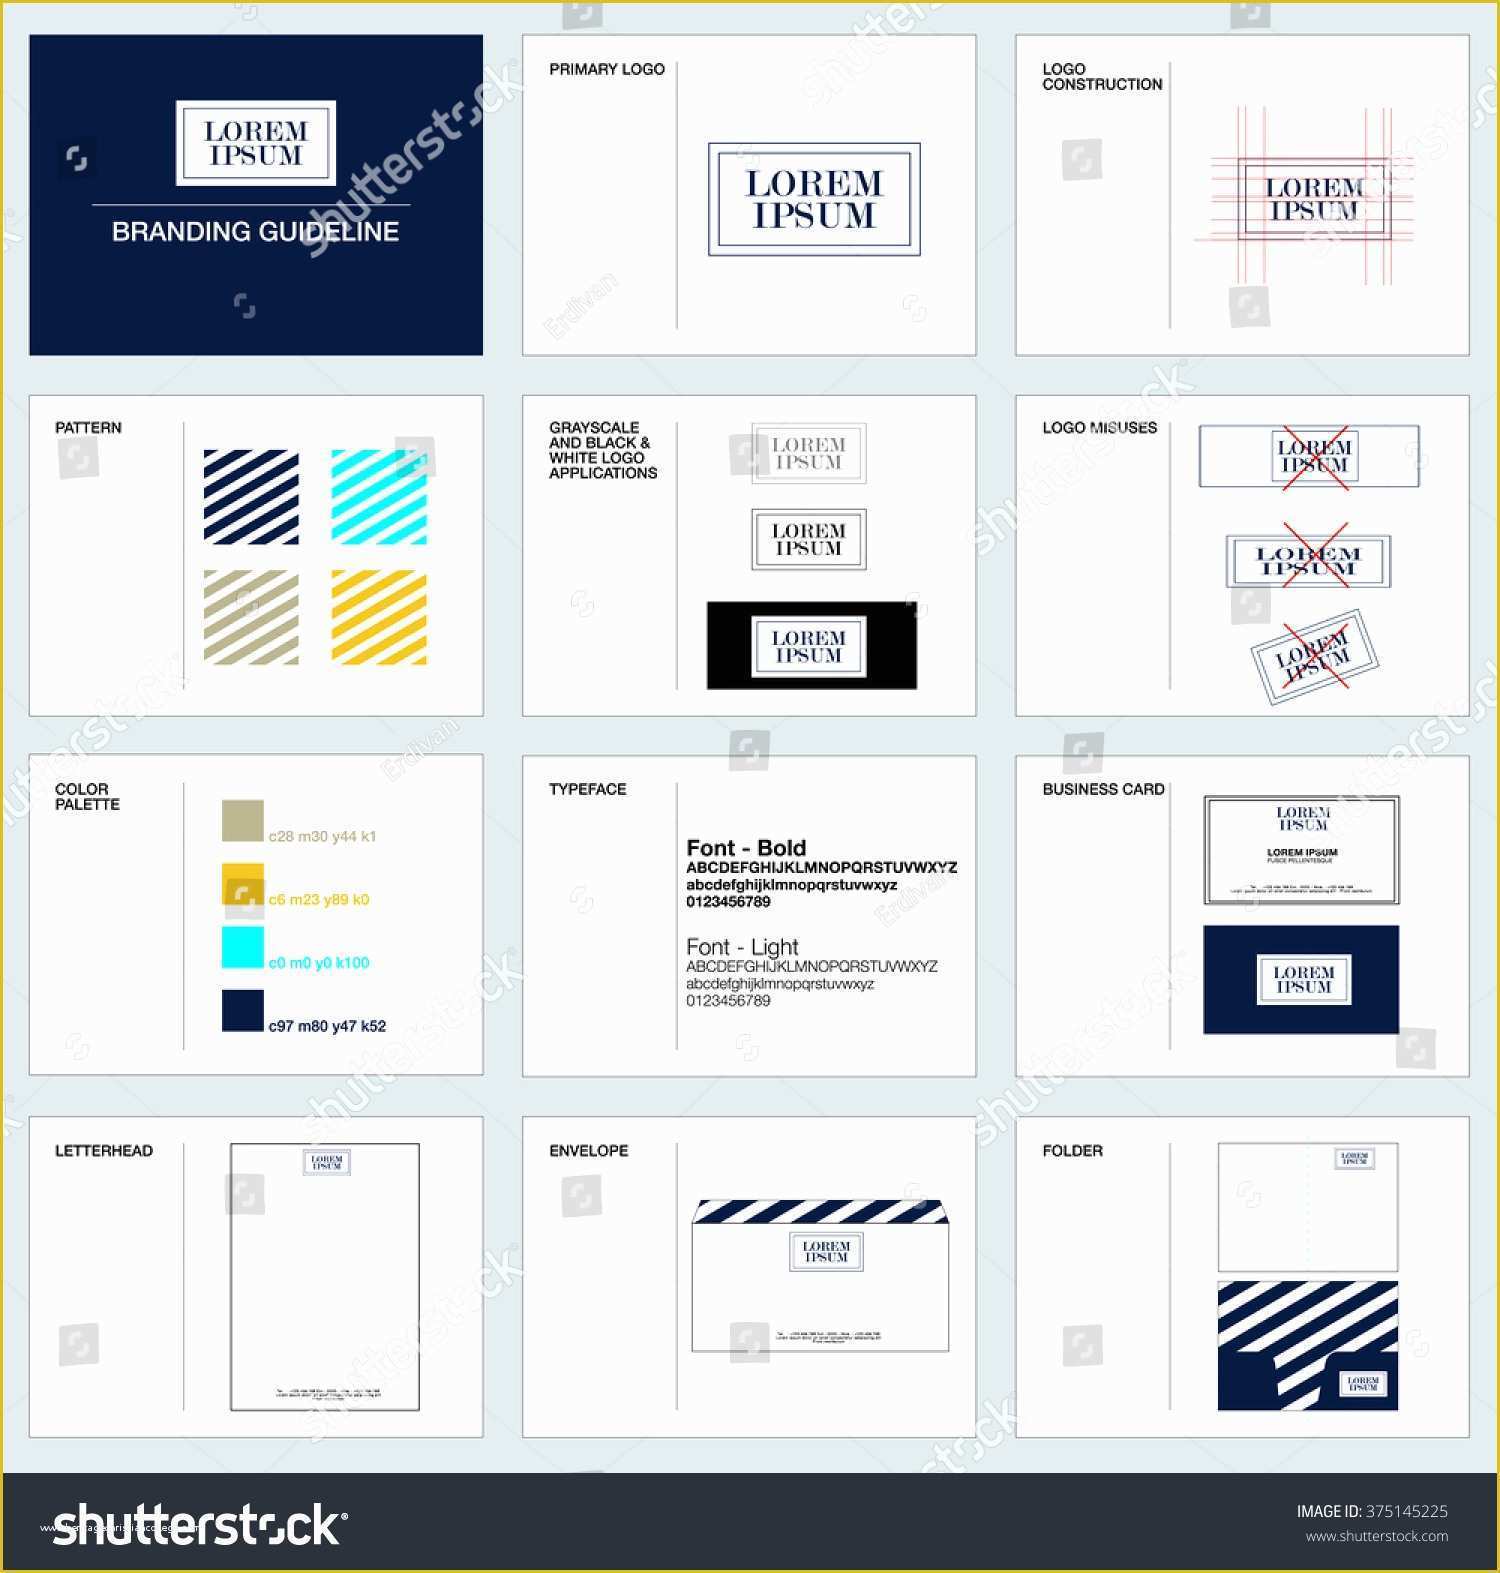 Free Brand Guidelines Template Of Branding Corporate Identity Guideline Design Stock Vector